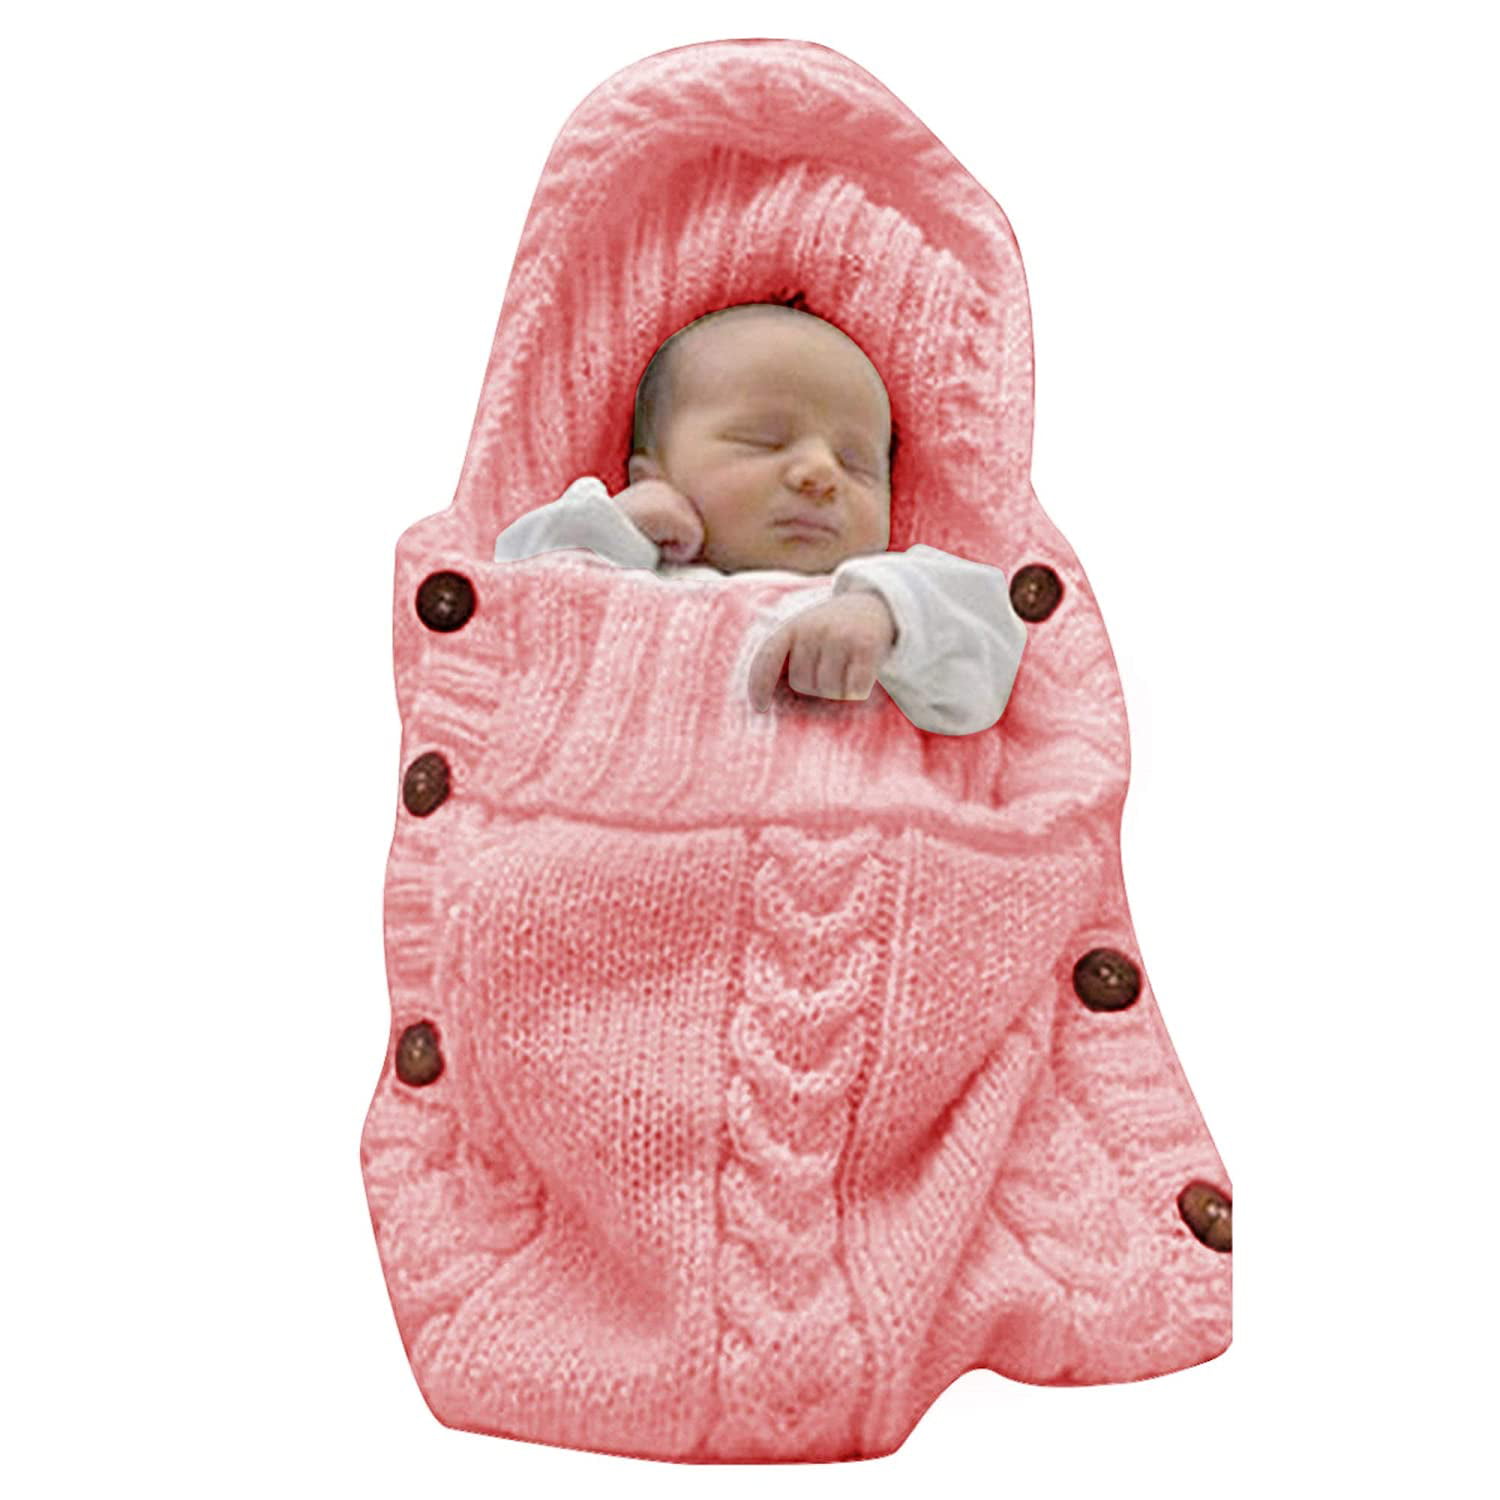 XMWEALTHY Baby Swaddle Blankets Plush Bear Swaddling Wraps Baby Clothes for 0-6 Newborn Months Girls Boys Ideal Baby Registry Pink 